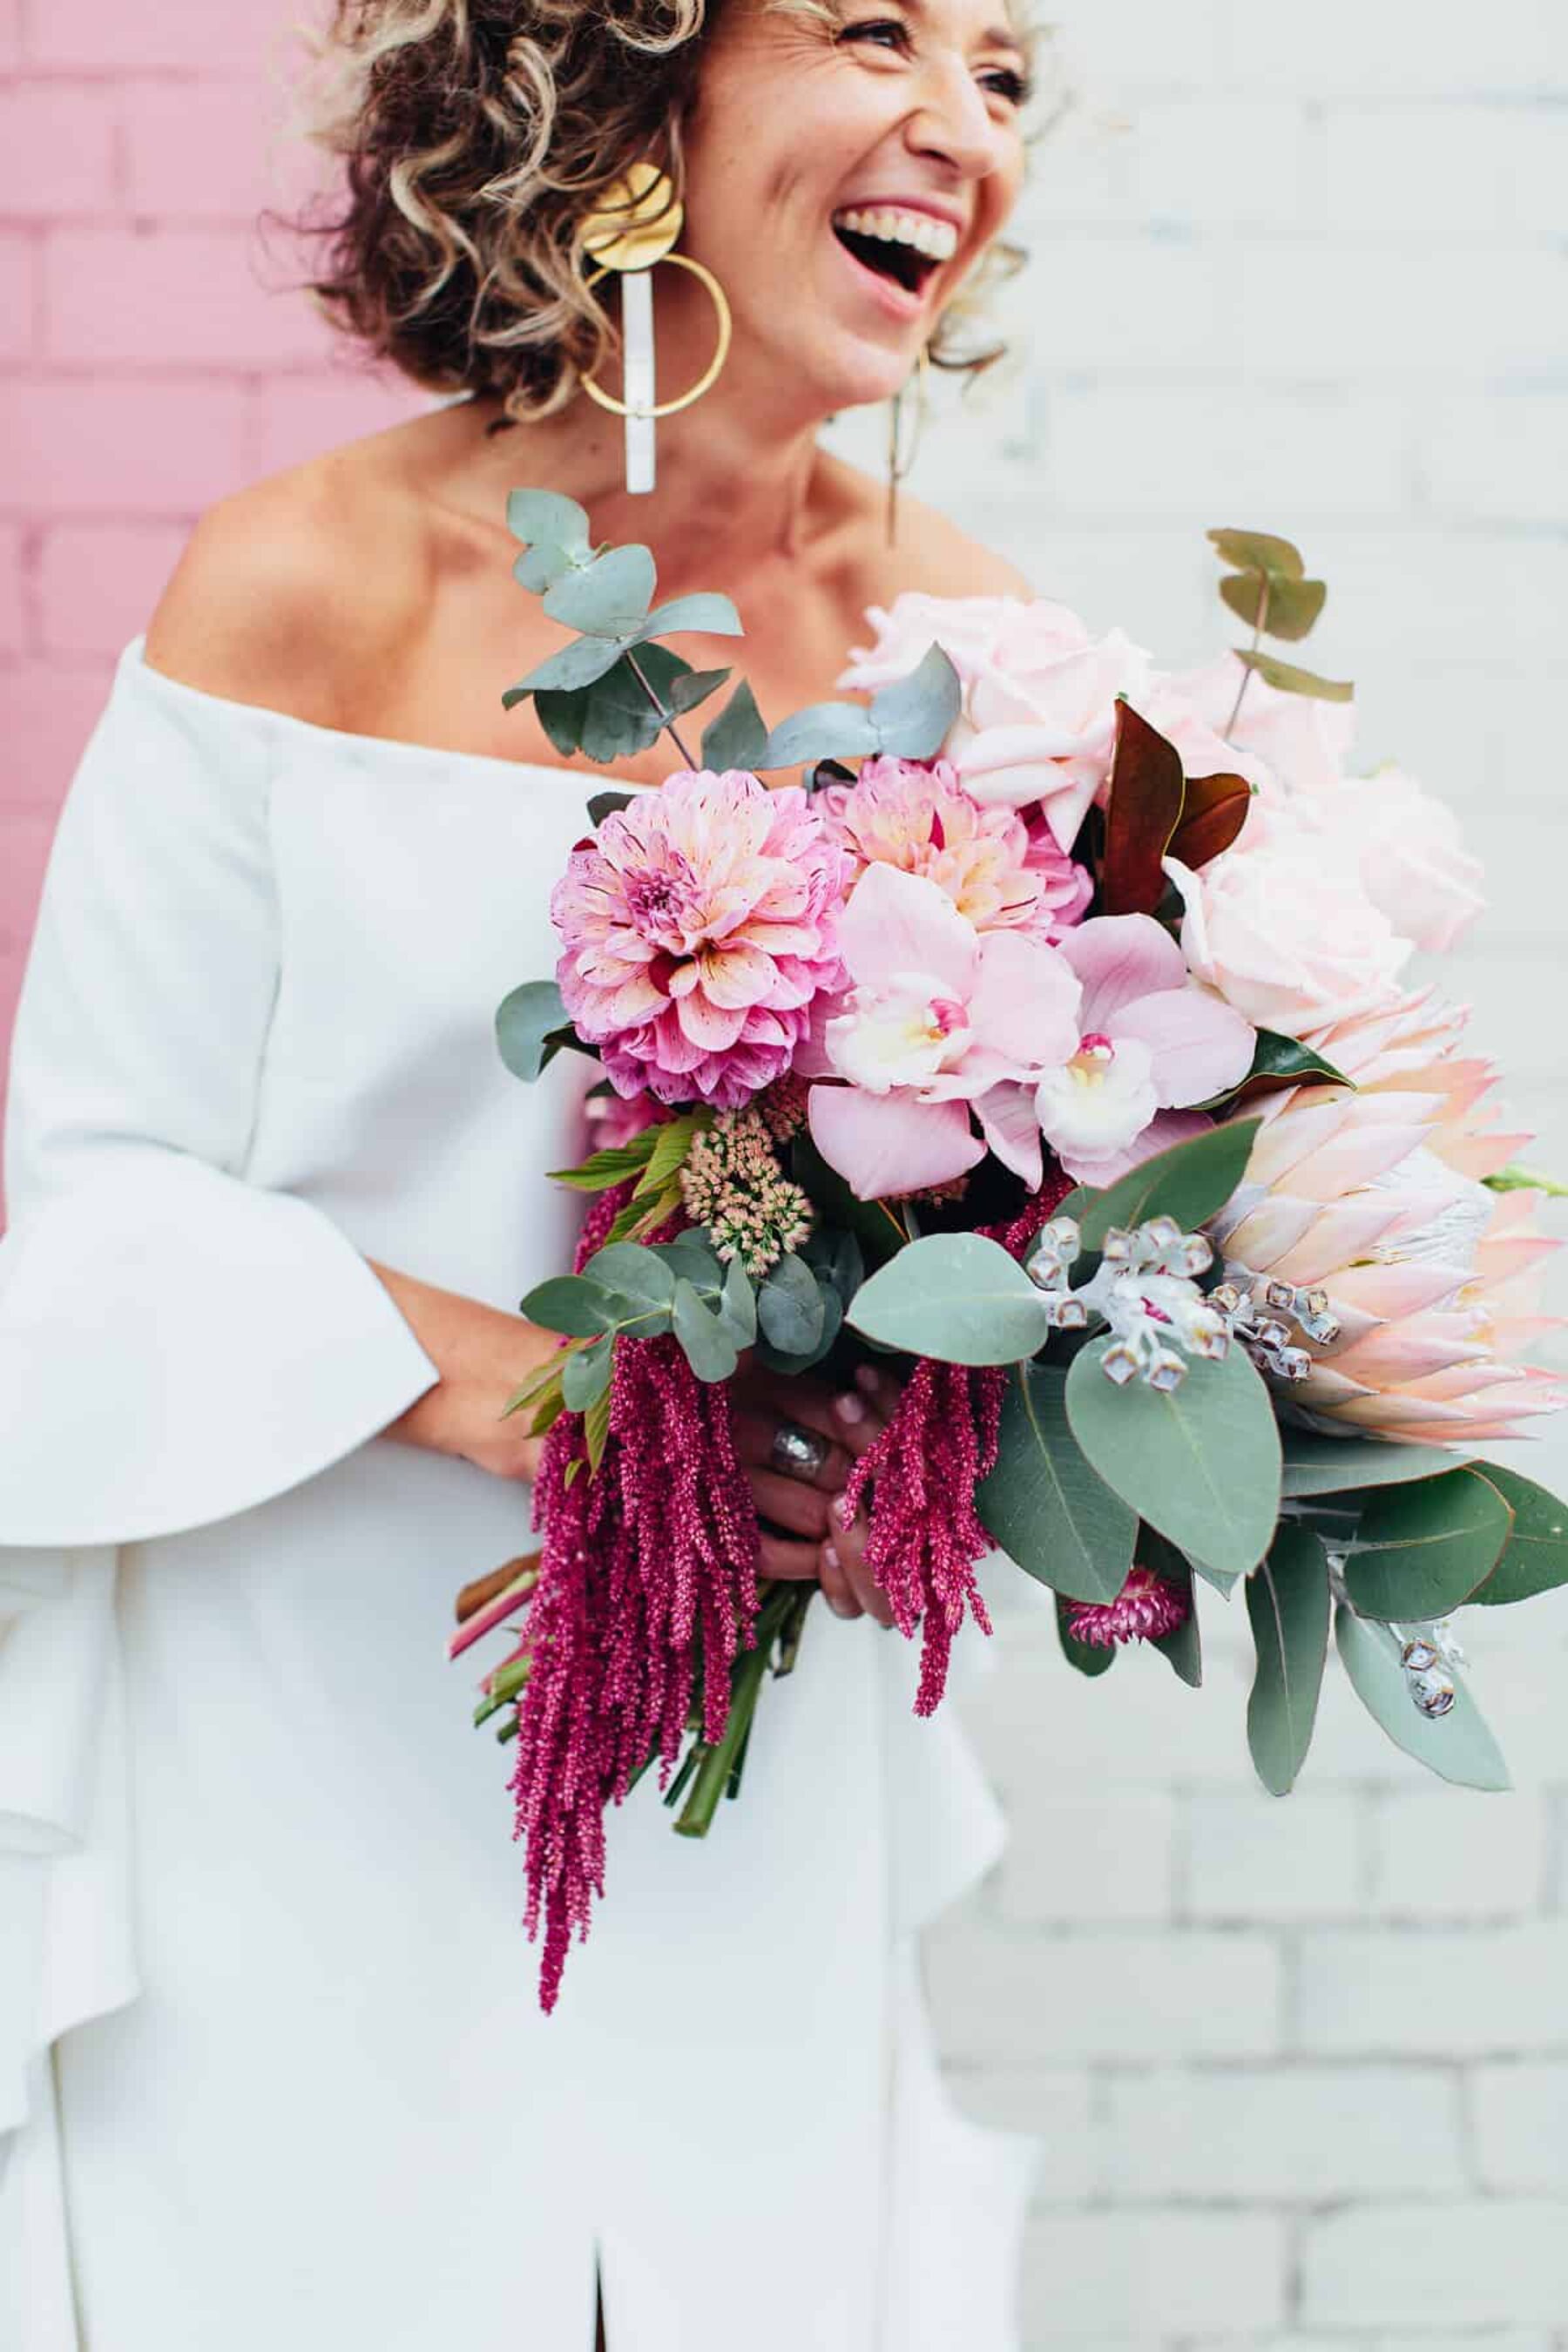 vibrant pink bouquet with with protea, amaranth and orchids